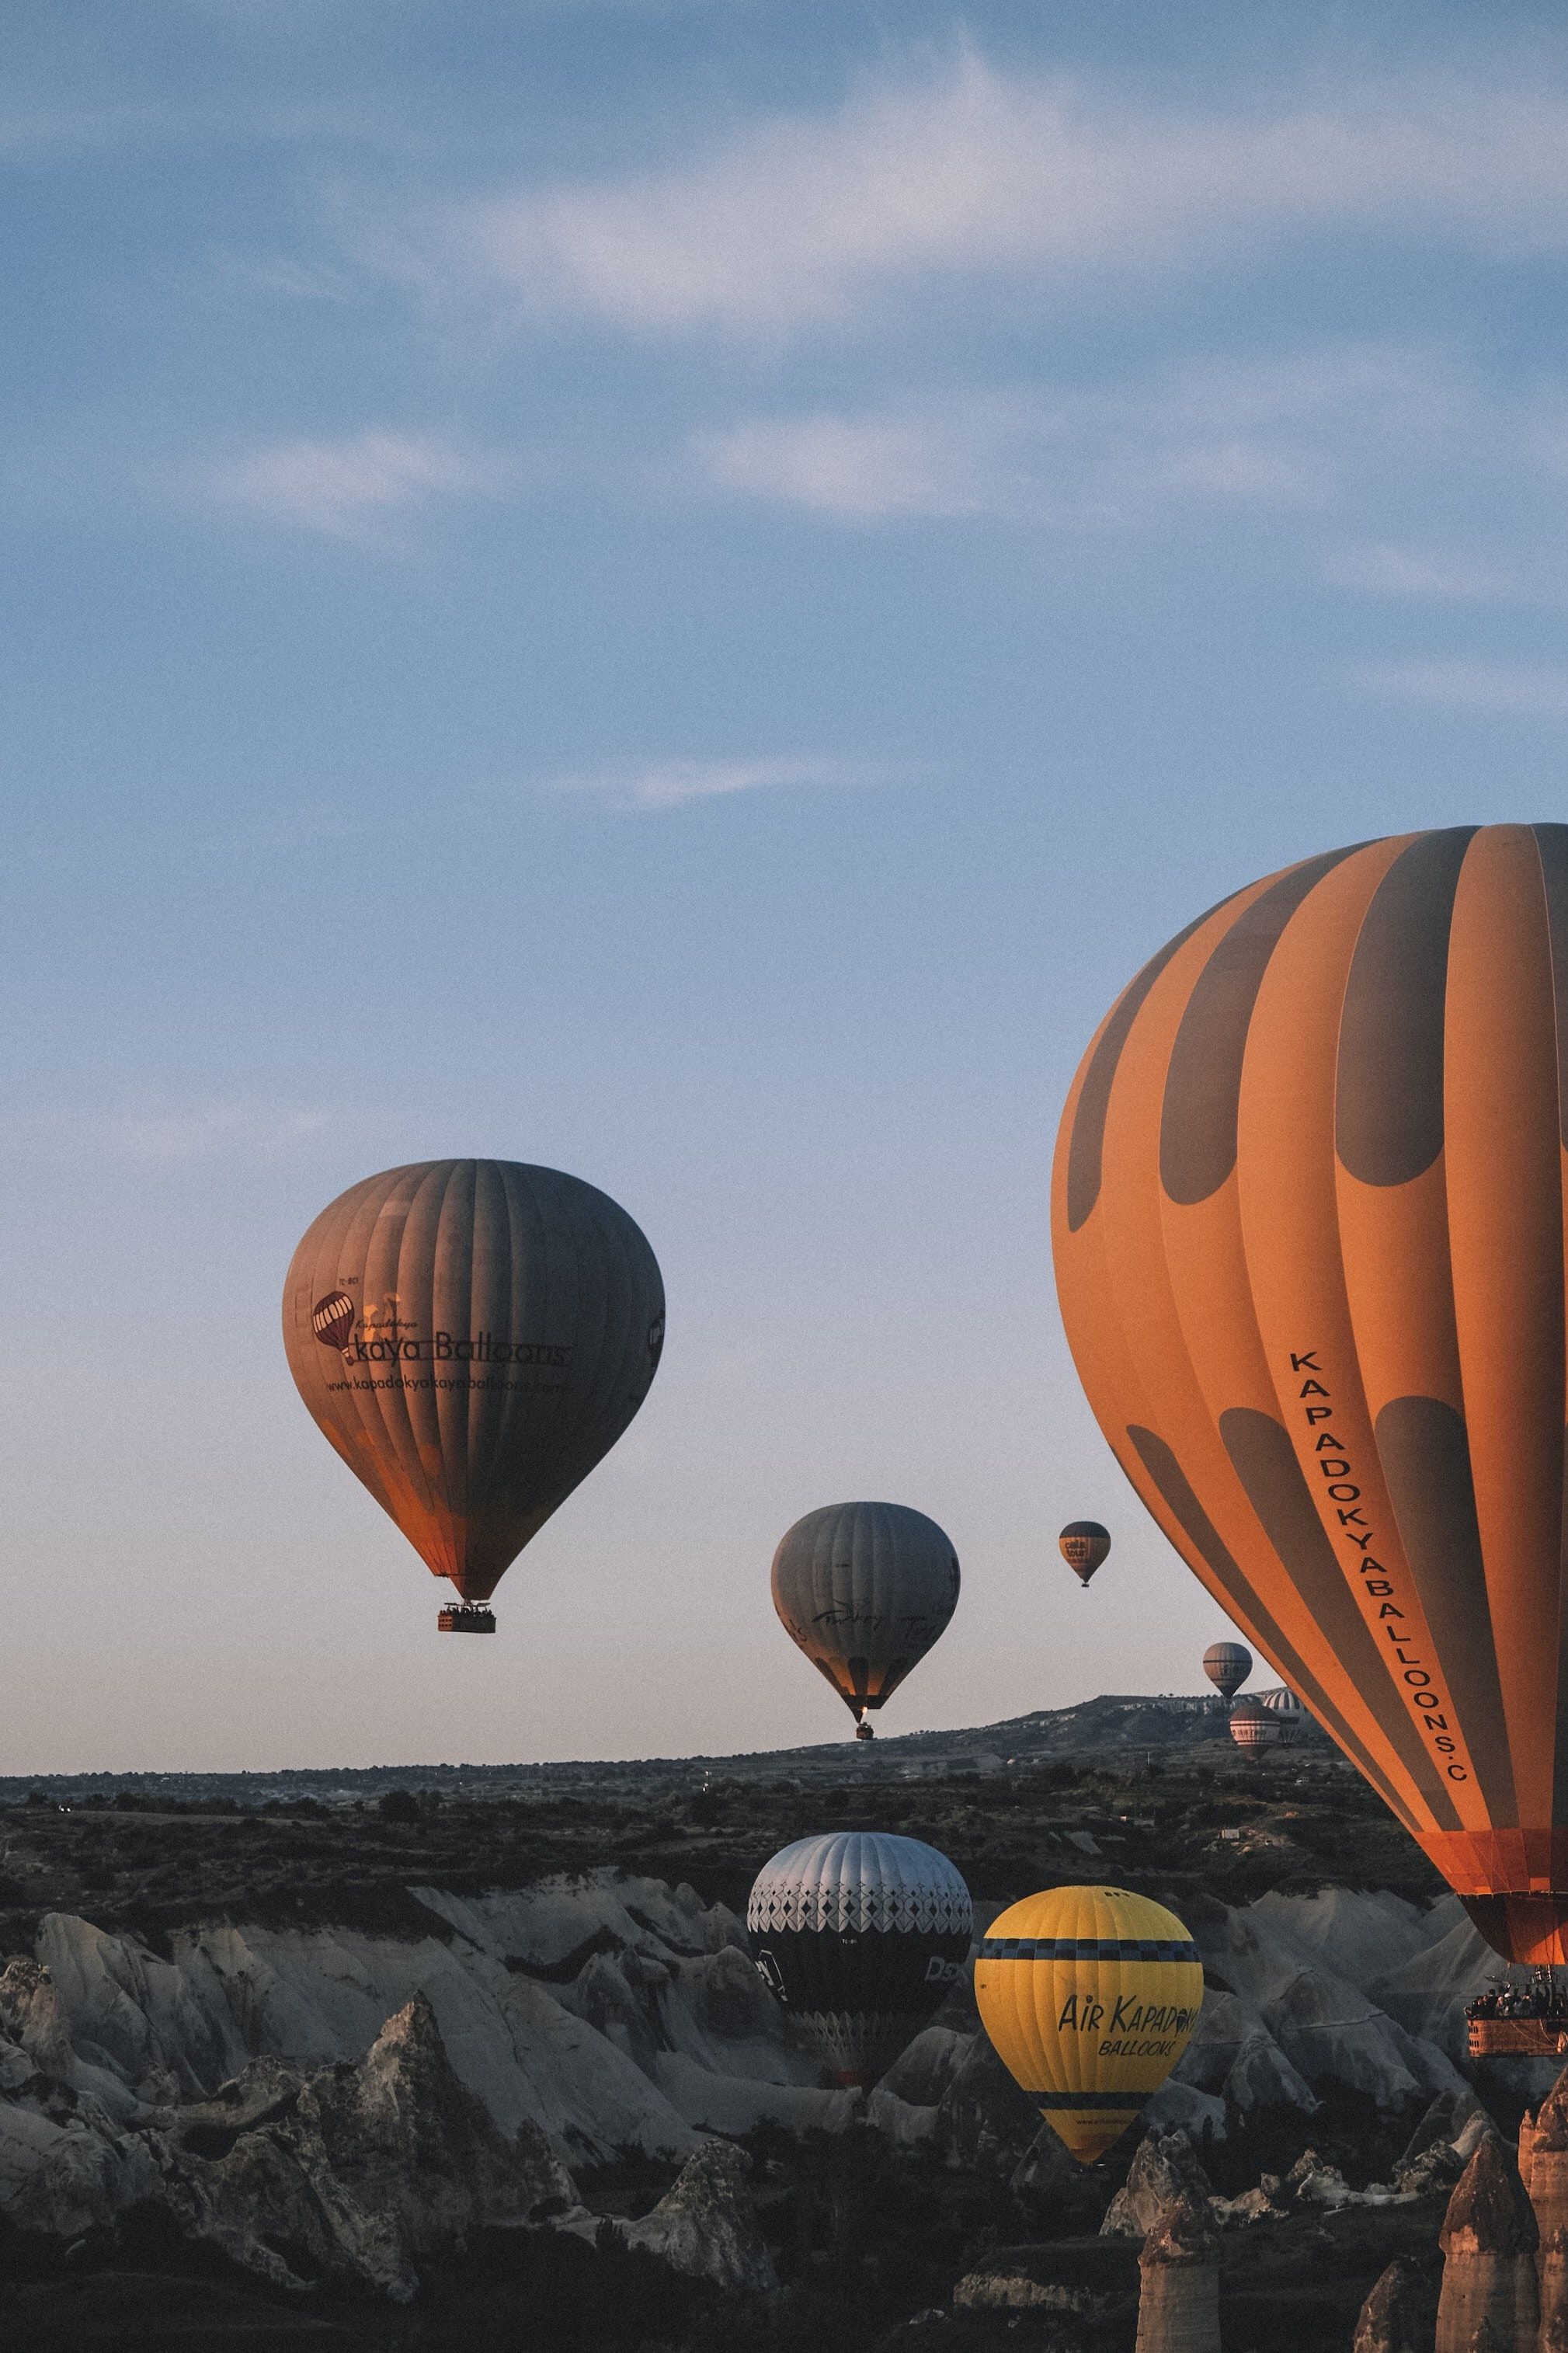 Hot air balloons floating over a rocky landscape - Hot air balloons